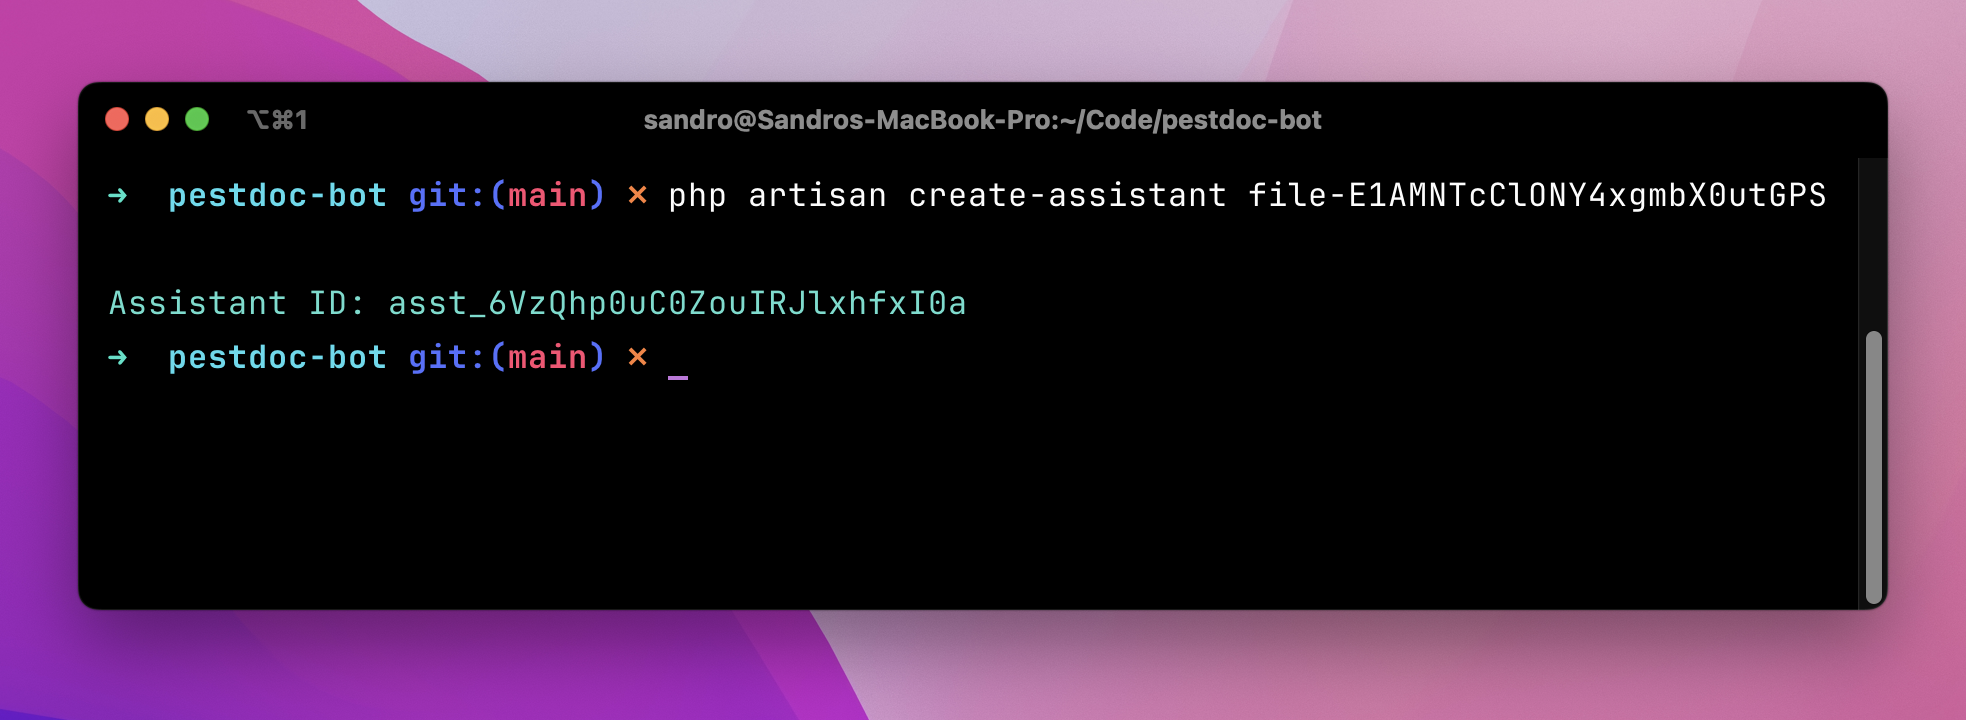 Create assistant output